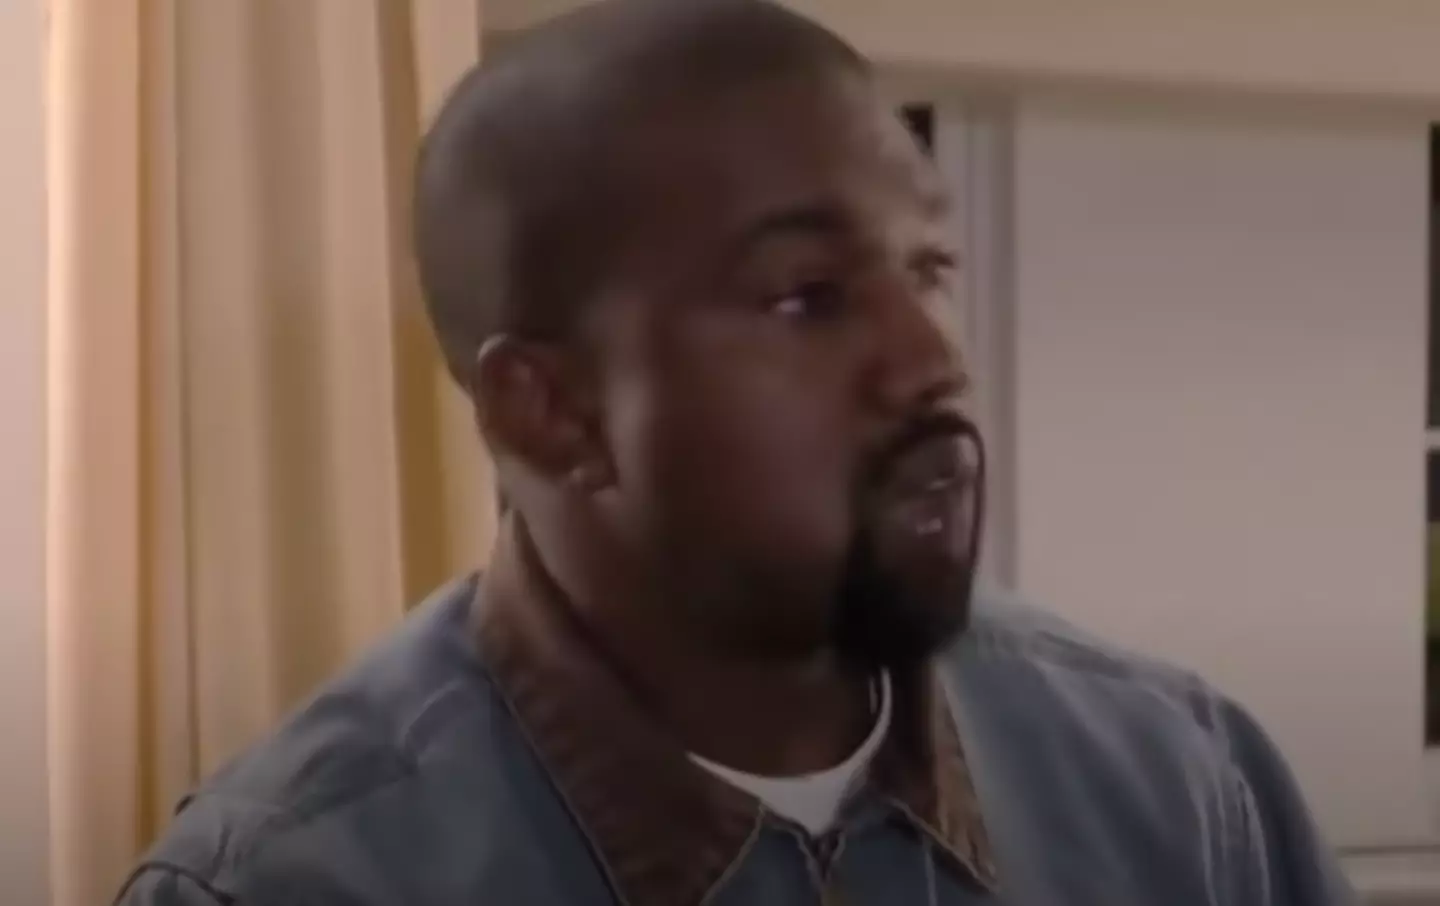 People are calling Kanye's behaviour 'toxic' in the scene (